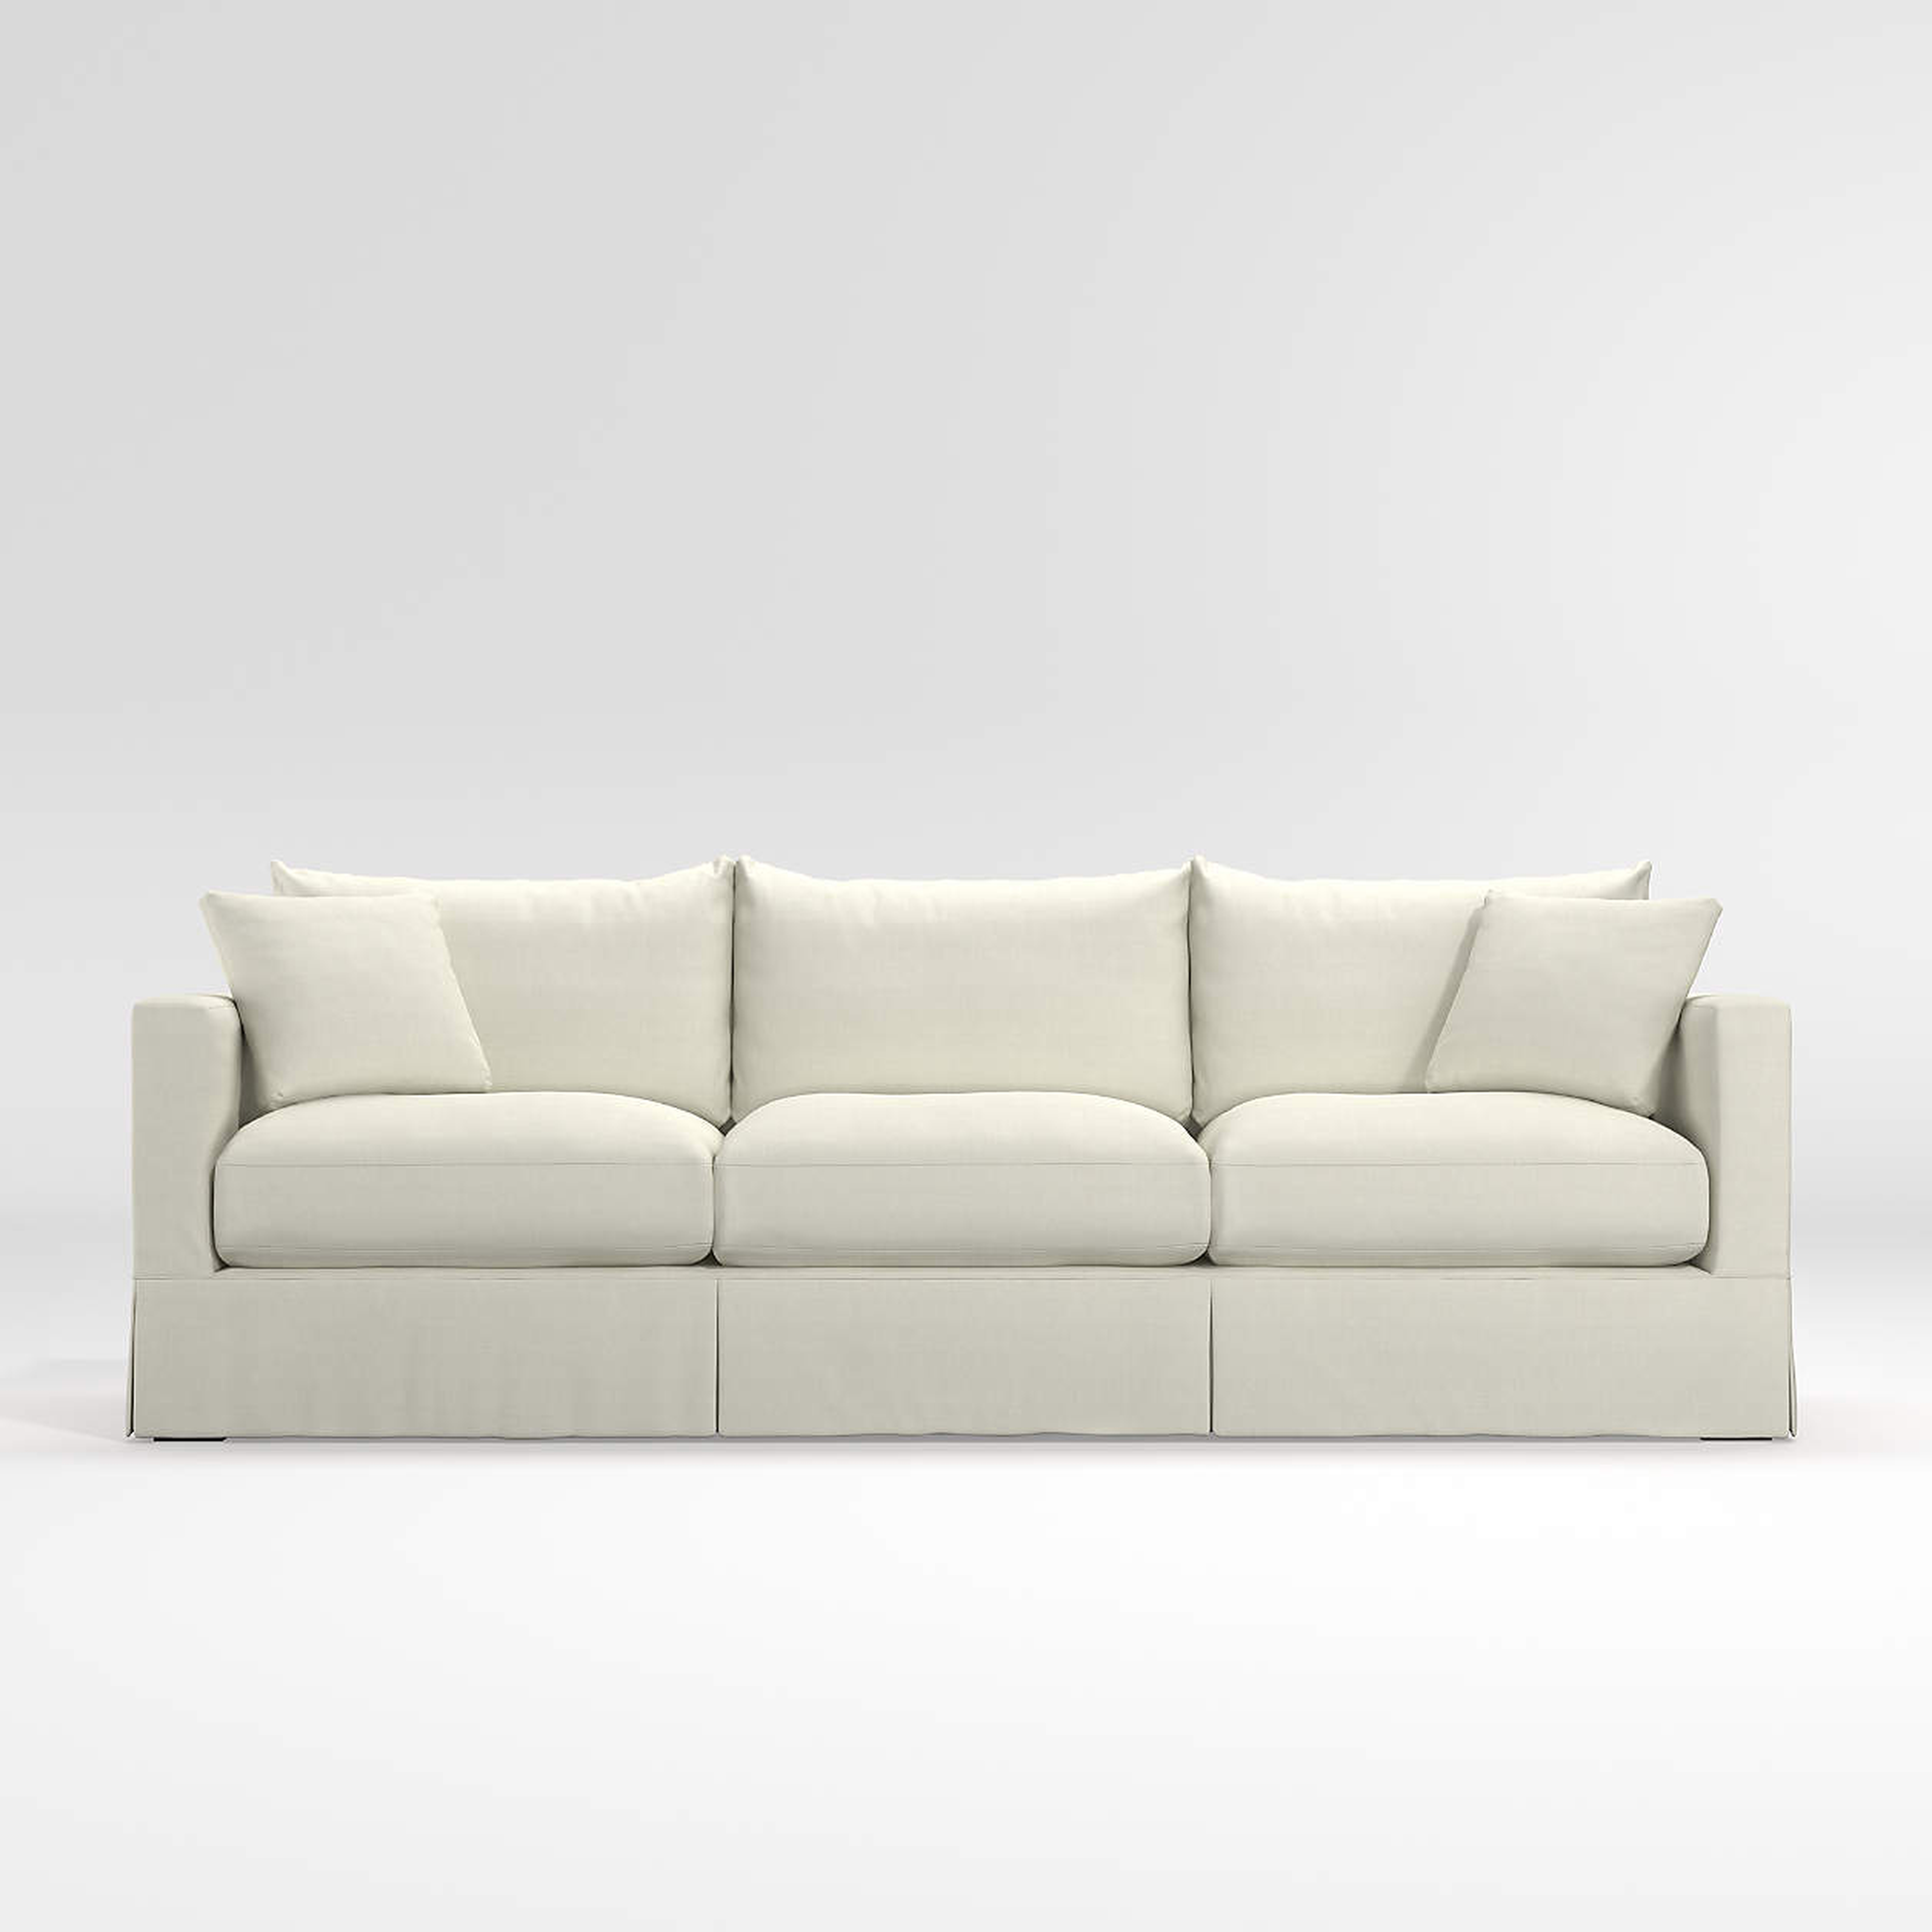 Willow 103" Grande Modern Slipcovered Sofa - Crate and Barrel